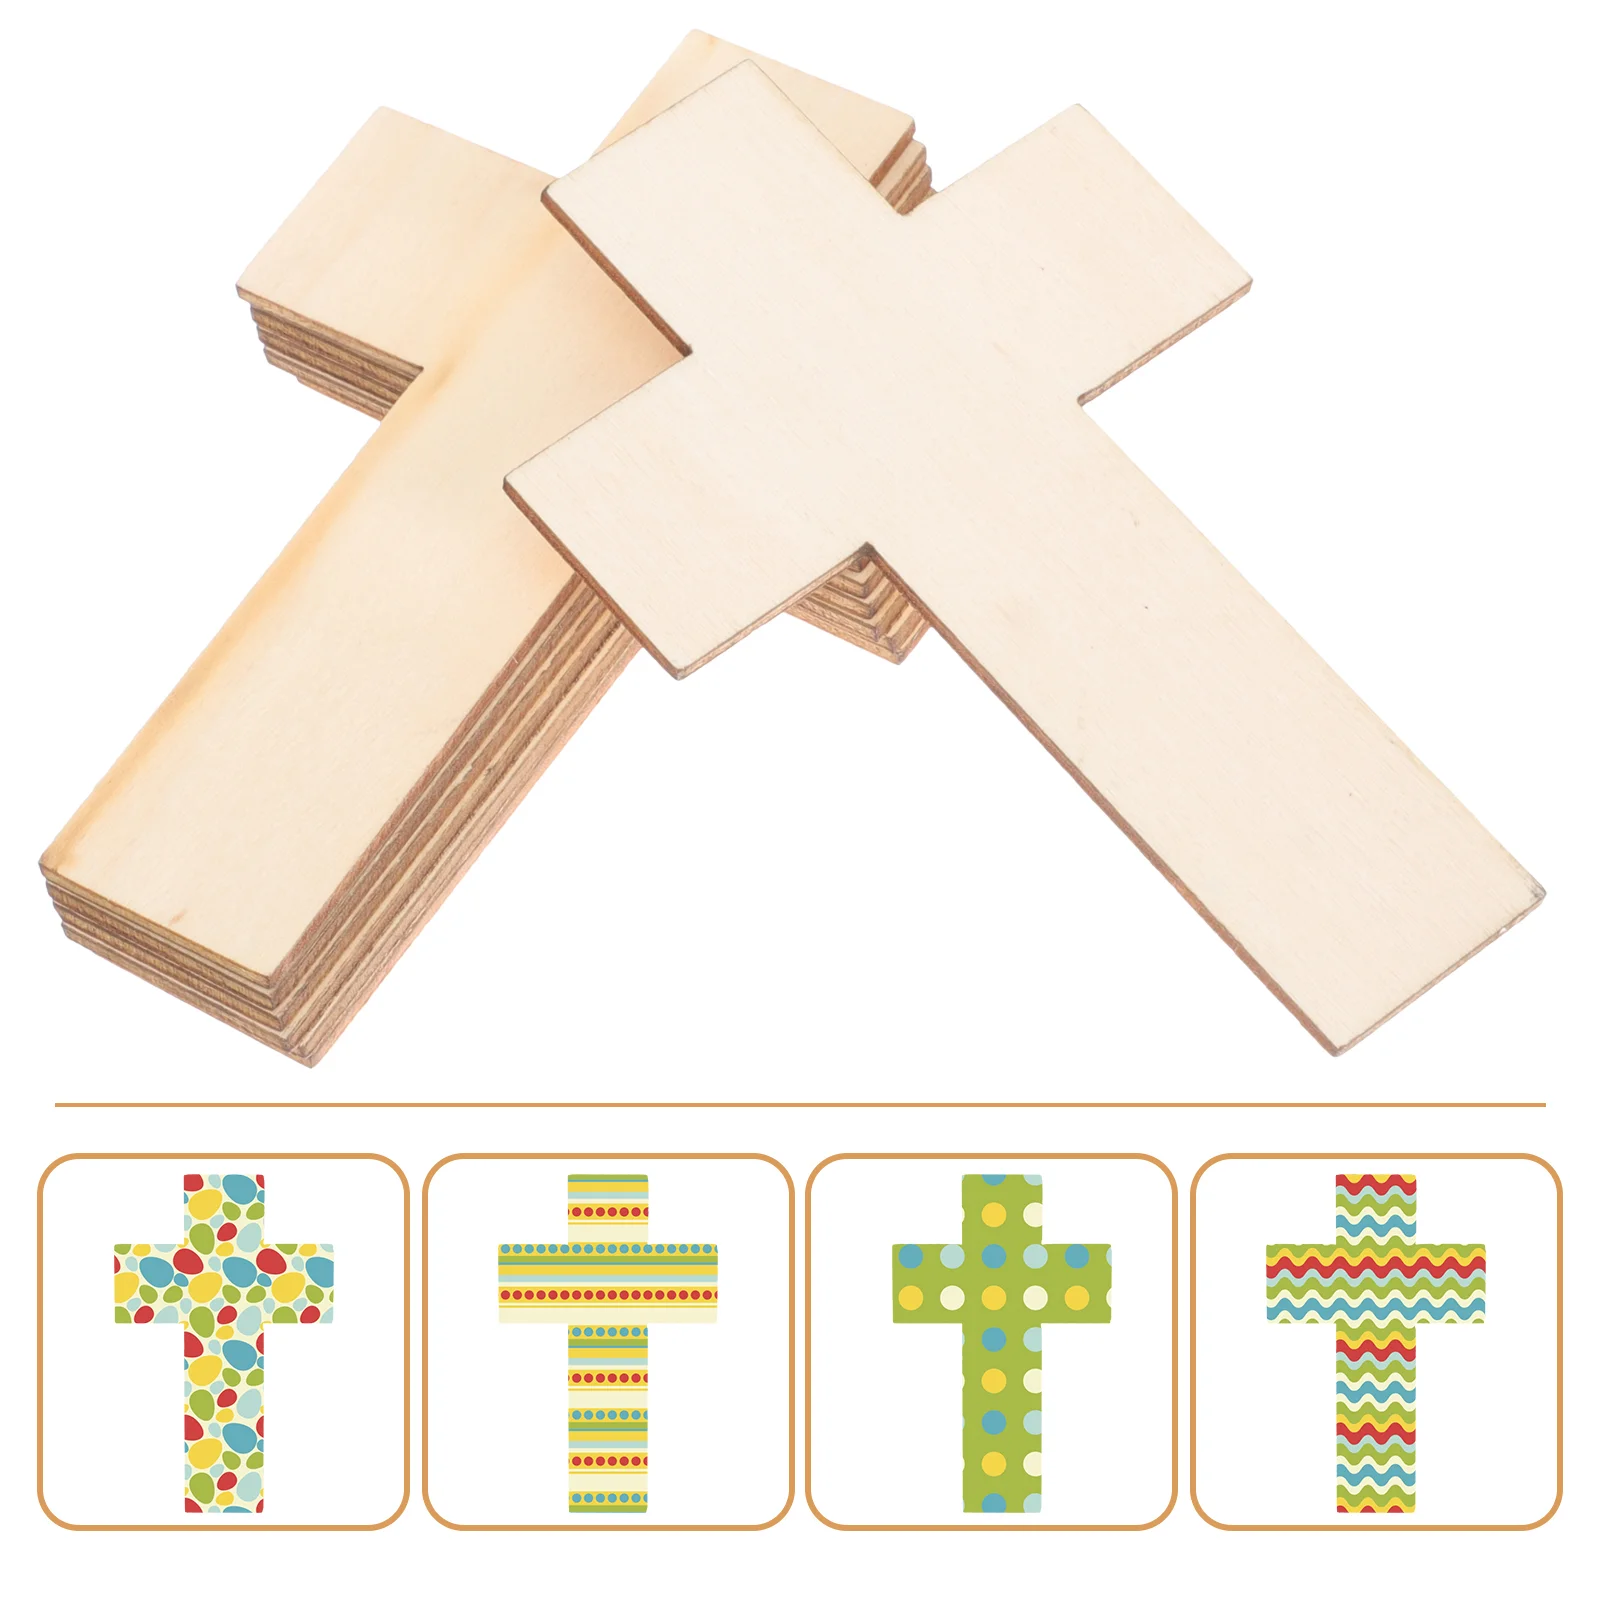 

20 Pcs Wooden Slices Unfinished Cross Shaped Wooden Pieces Poppets Kids Wood Slices Easter Party Gift Tags Woodsy Decor